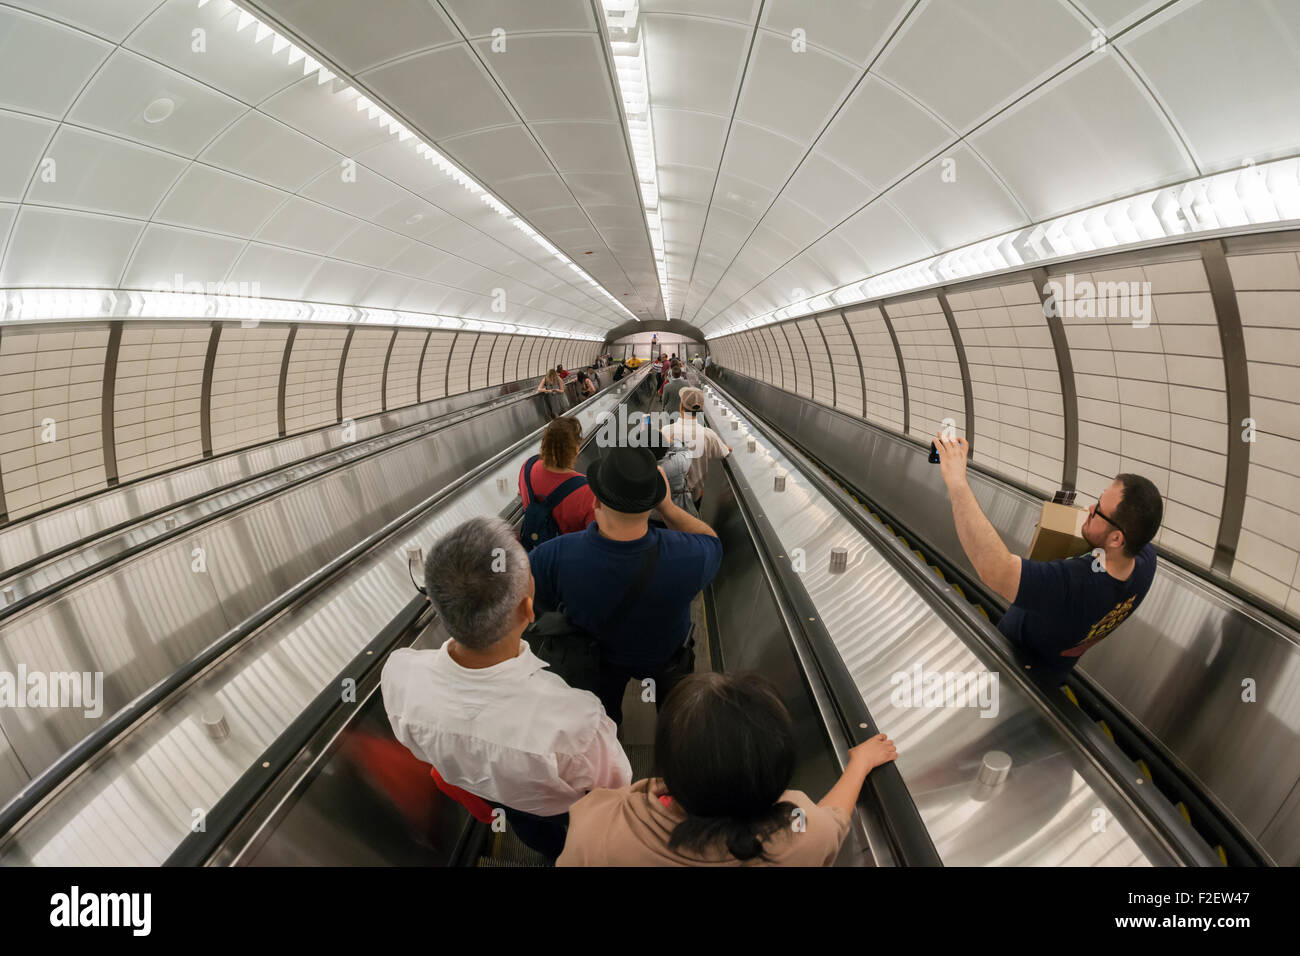 Visitors ride the escalators in the new 34th Street-Hudson Yards terminal station on the 7 Subway line extension in New York on its grand opening, Sunday, September 13, 2015.  The new tunnel from Times Square  terminates 108 feet below street level at West 34th Street and Eleventh Avenue at the doorstep of the rezoned 45 block Hudson Yards development. It is the first subway station to open in 26 years and the first line extension in 60 years. (© Richard B. Levine) Stock Photo